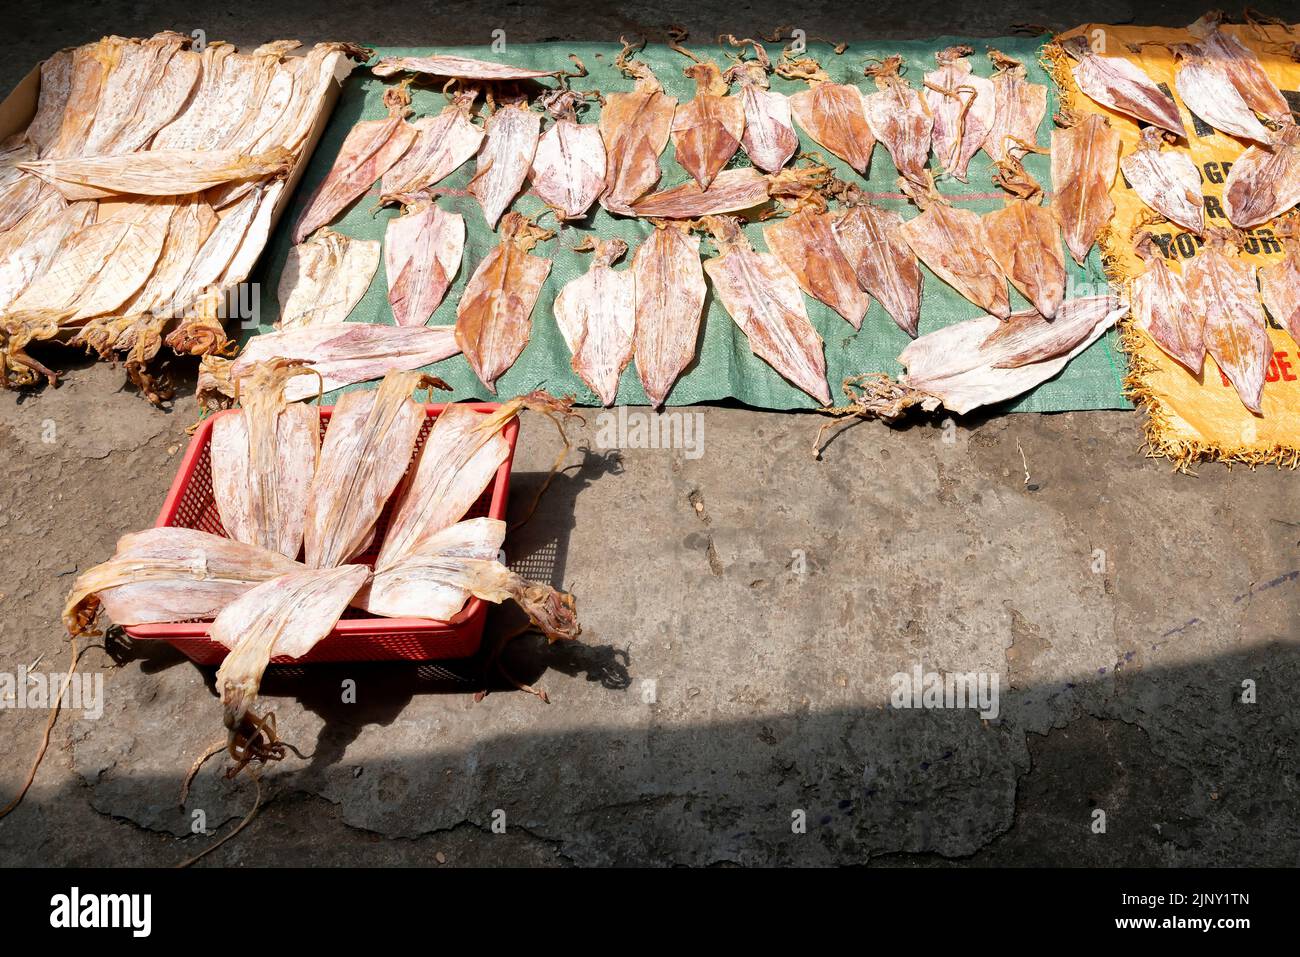 Sun-dried squid for sale on the street market Stock Photo